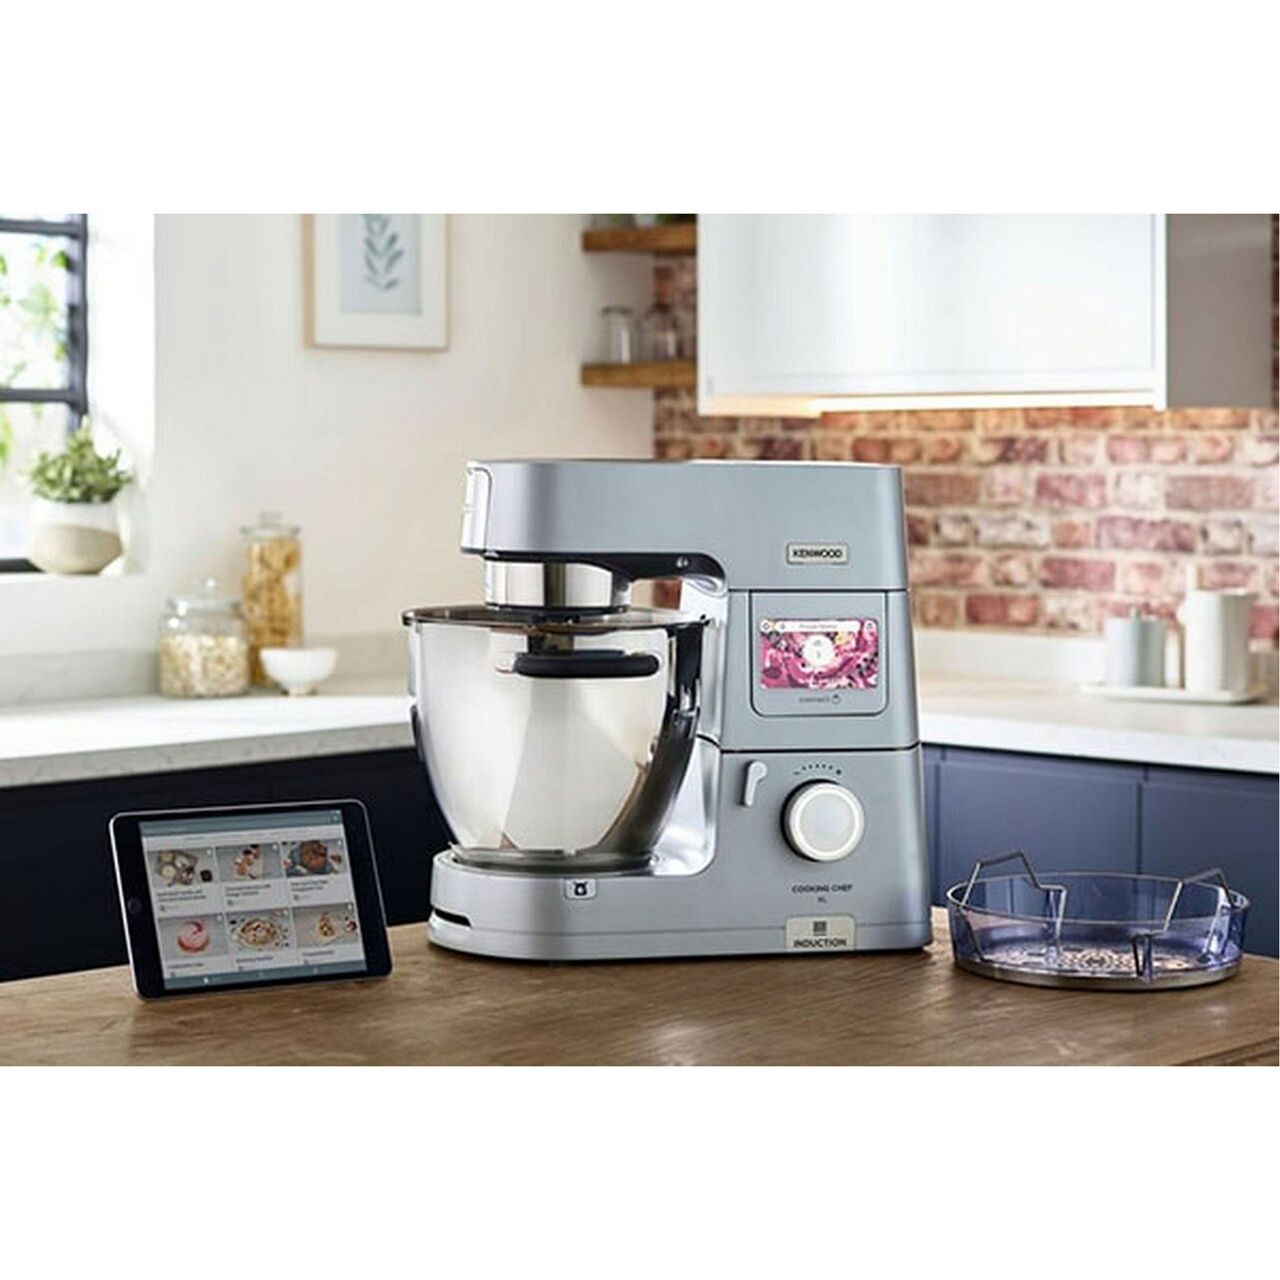 Kenwood Cooking Chef now available in the U.S. - CNET